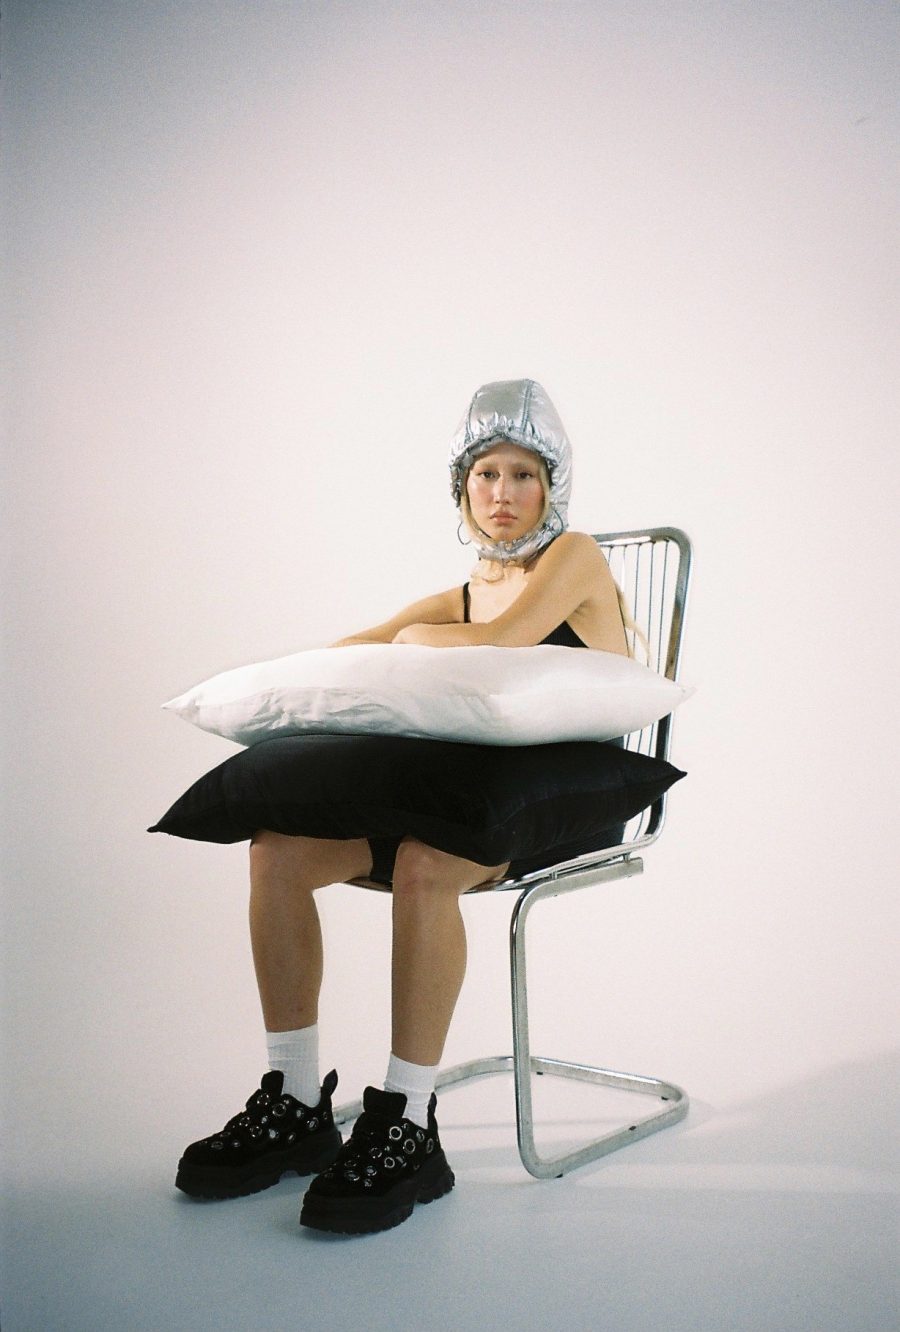 A person sitting on a metal chair holding pillows and wearing a silver hood. Taken by Lexi Laphor.